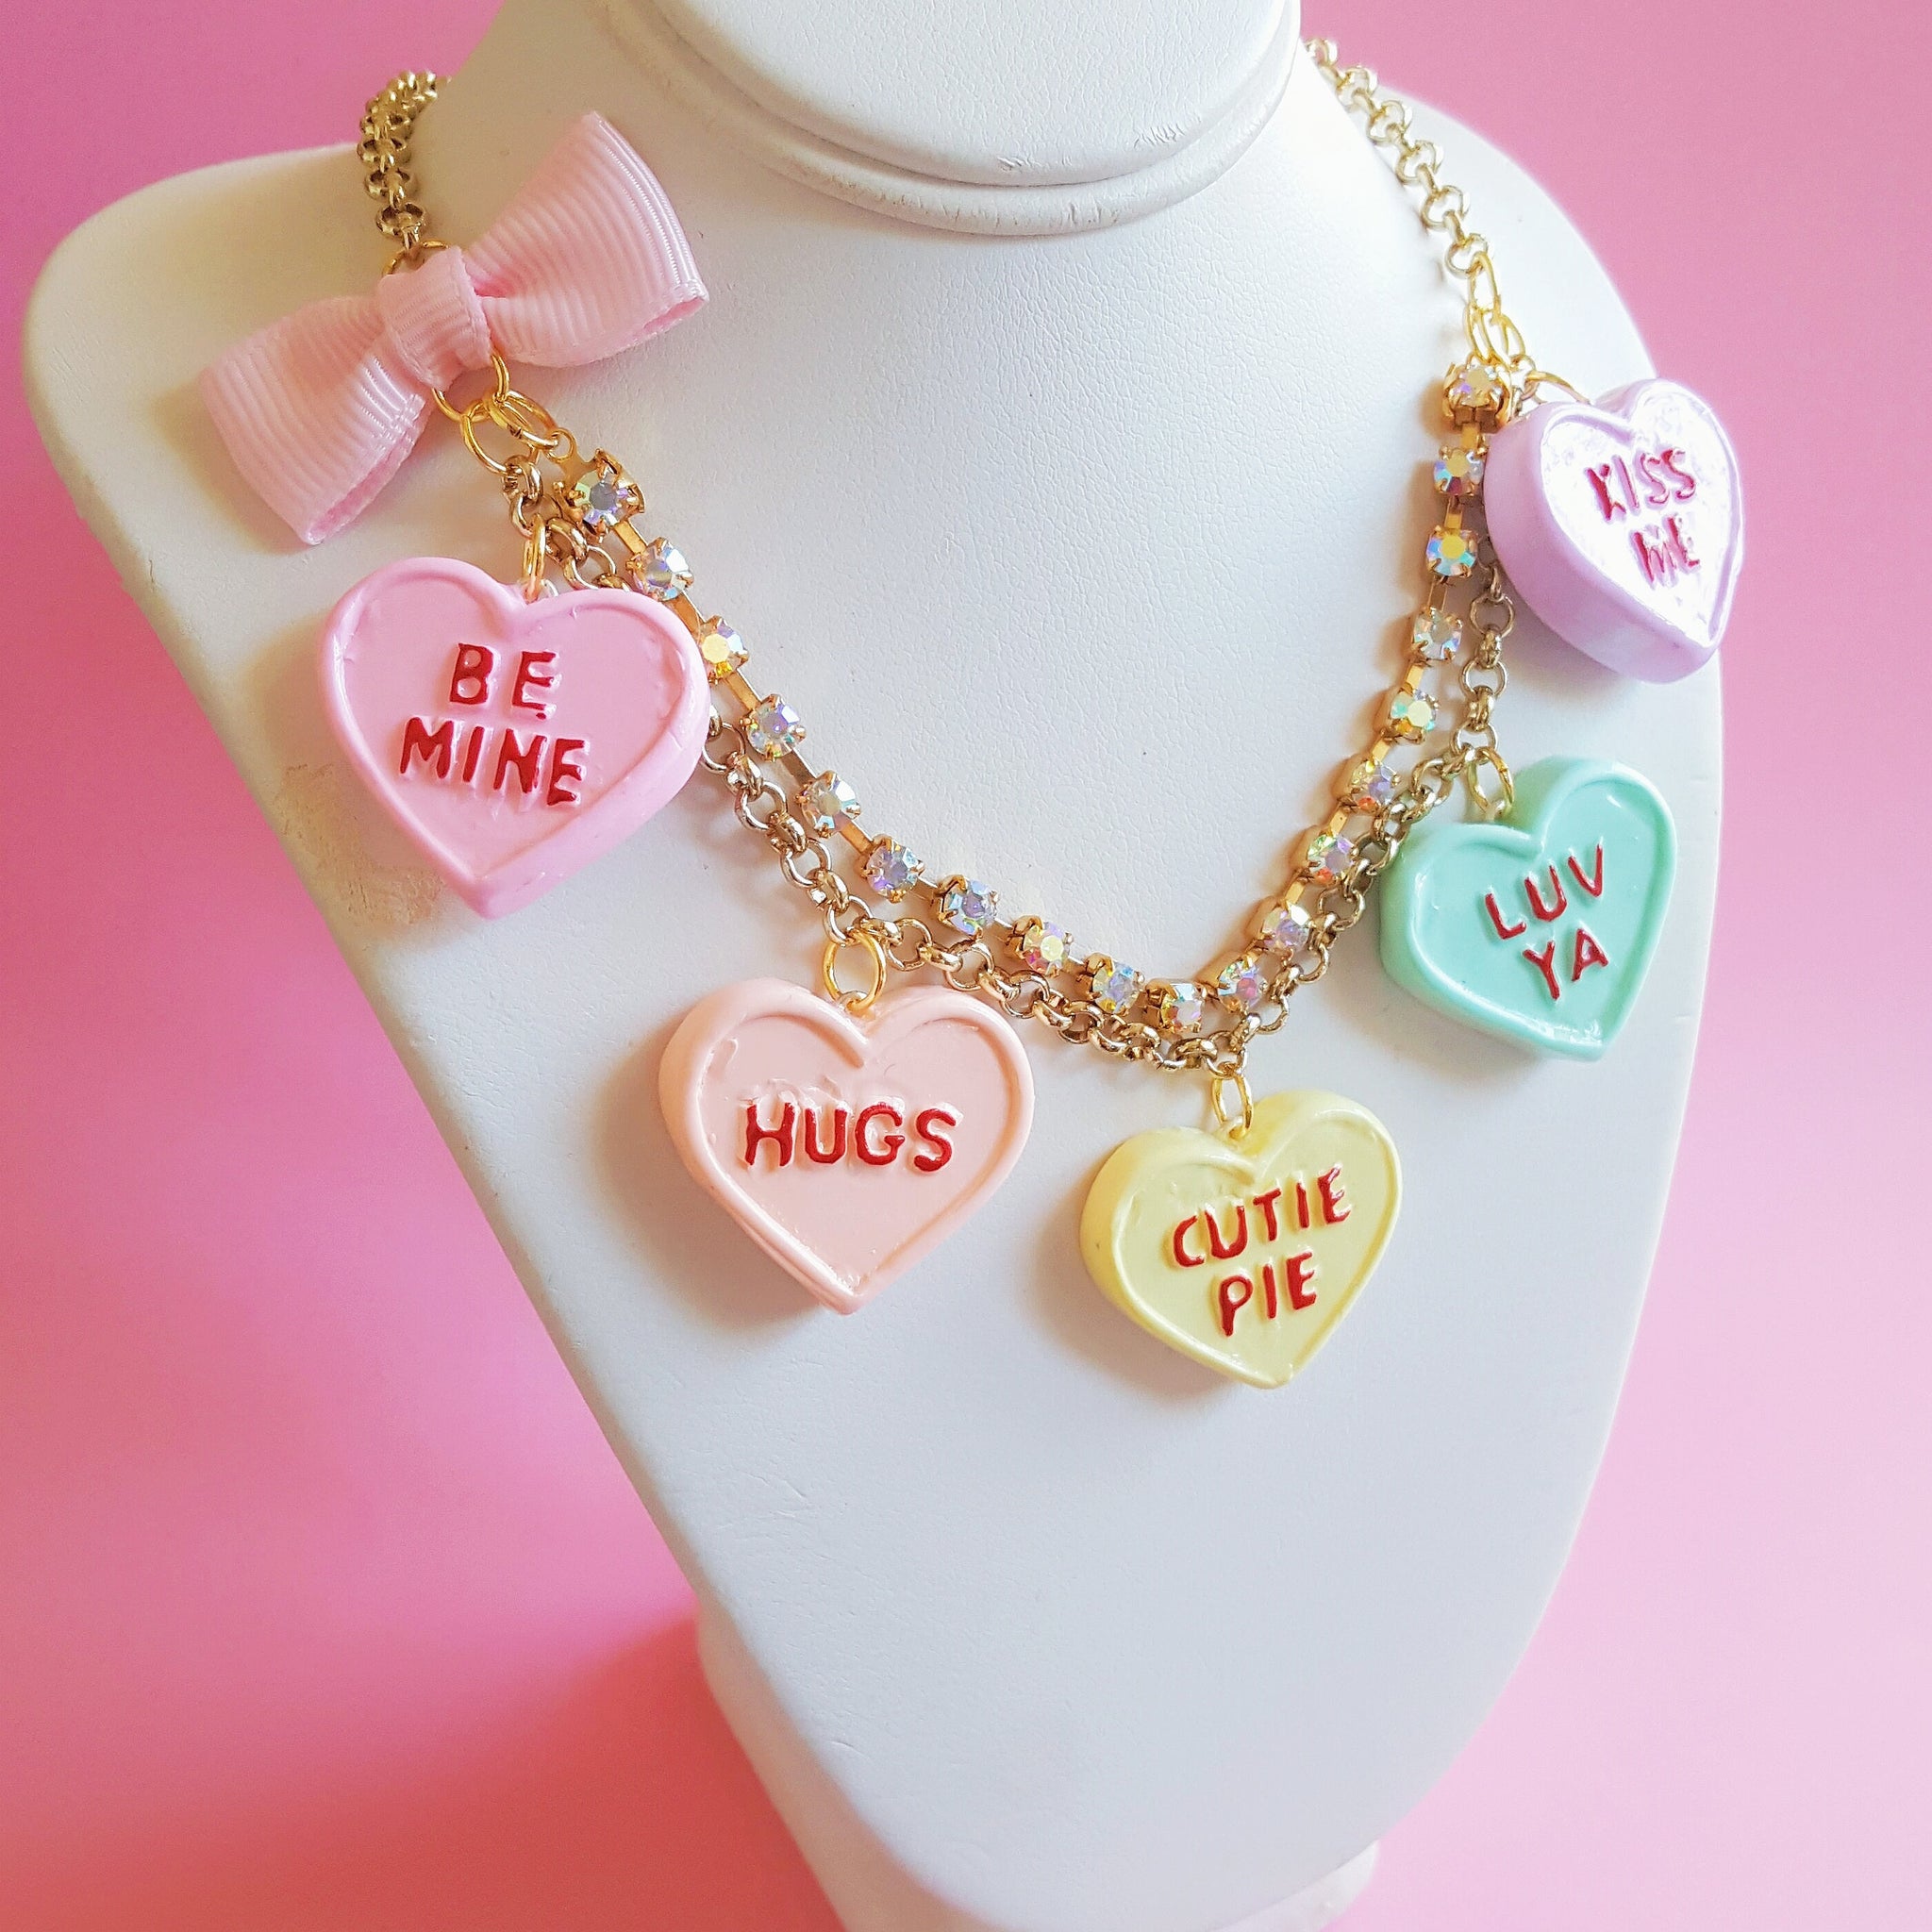 Heart Candy Charms – 6 per package – Shelly's Buttons And More